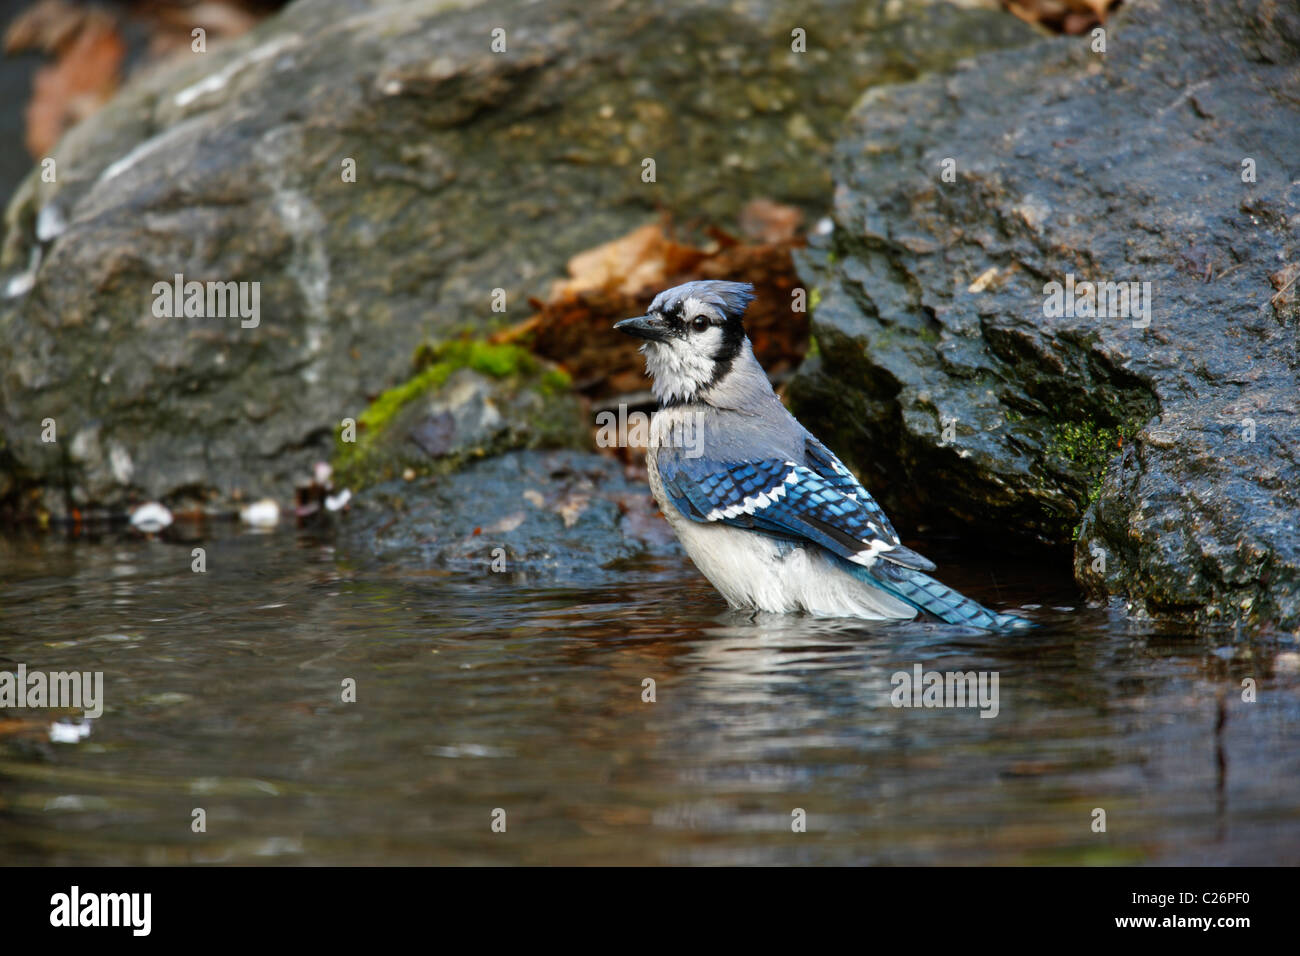 Blue Jay (Cyanocitta cristata bromia), bathing in the Gill within the Ramble in New York's Central Park. Stock Photo